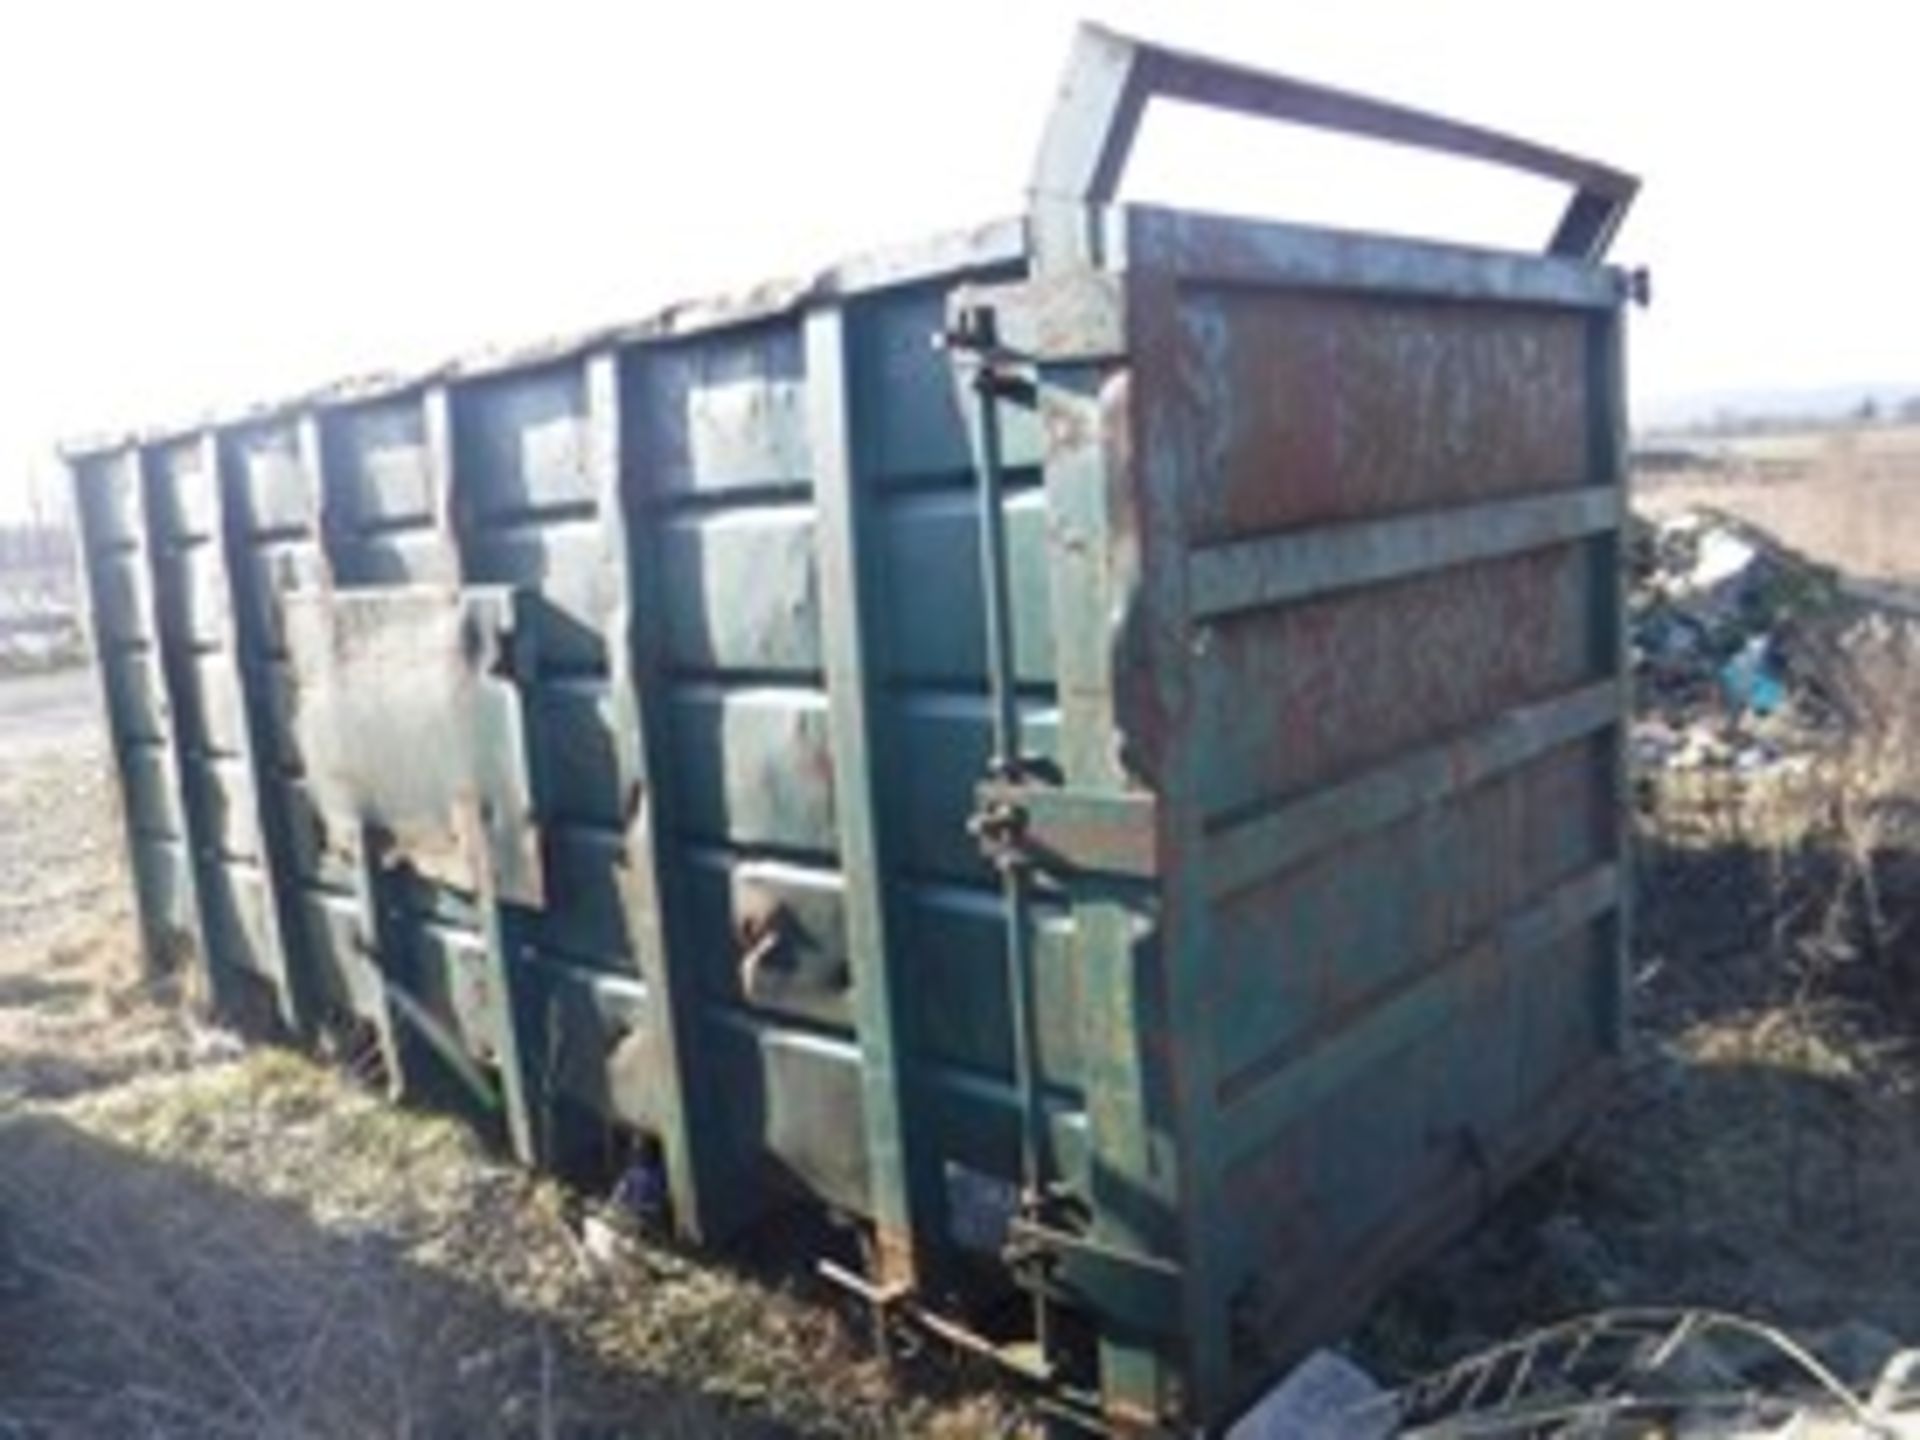 OPEN TOP SKIP. REAR DOOR HINGED AT RHS. MANFACTURED BY SKIP UNITS W2400 L5900 H2700. SURFACE RUST. M - Image 2 of 2